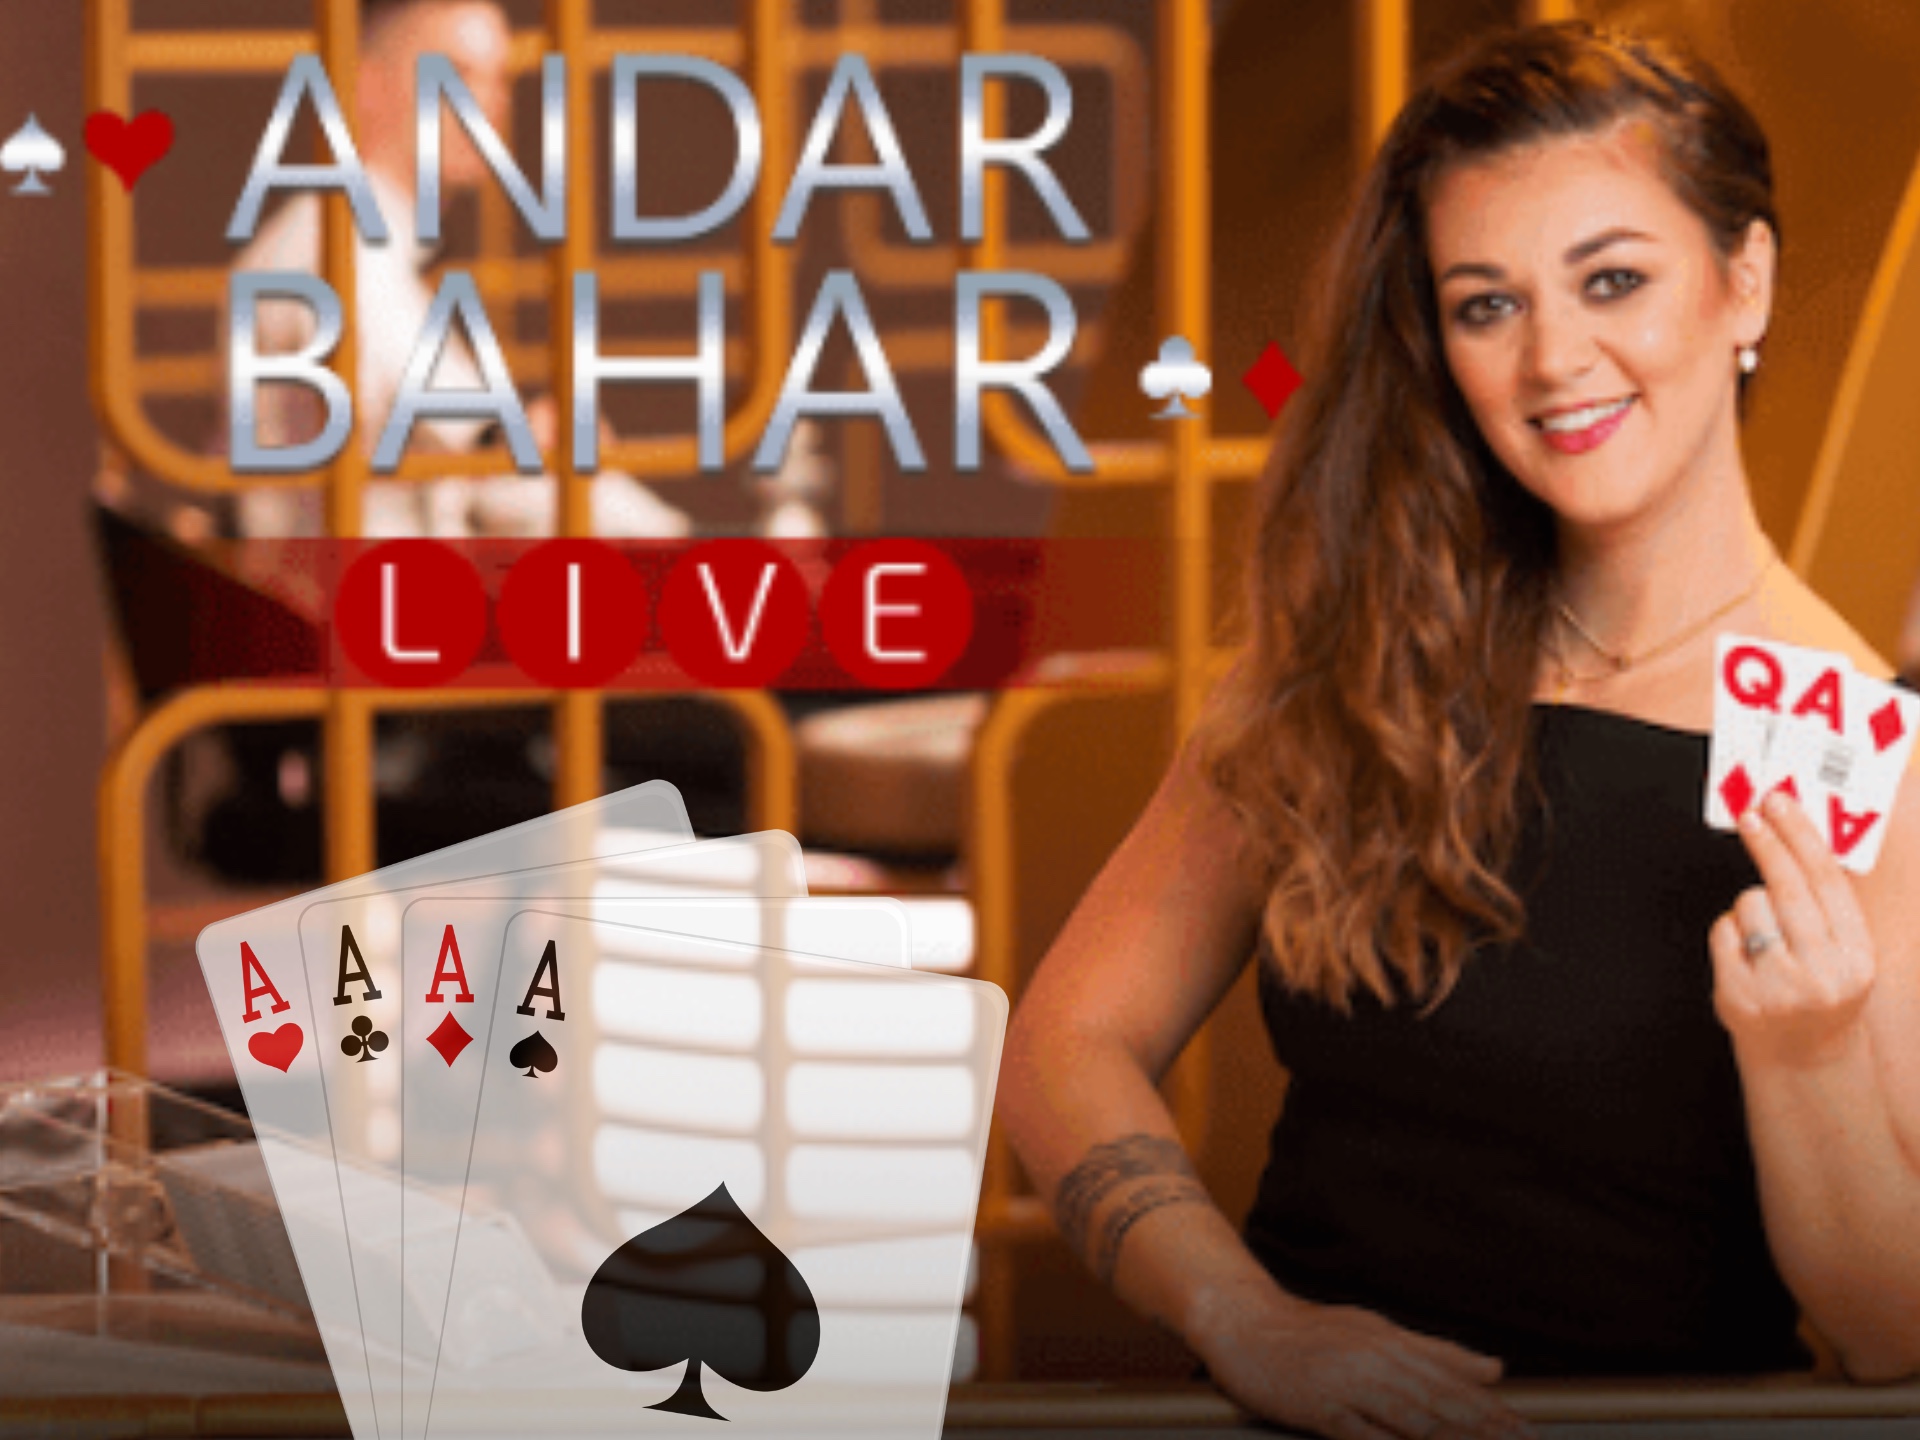 There are an option to play online andar bahar with live dealer